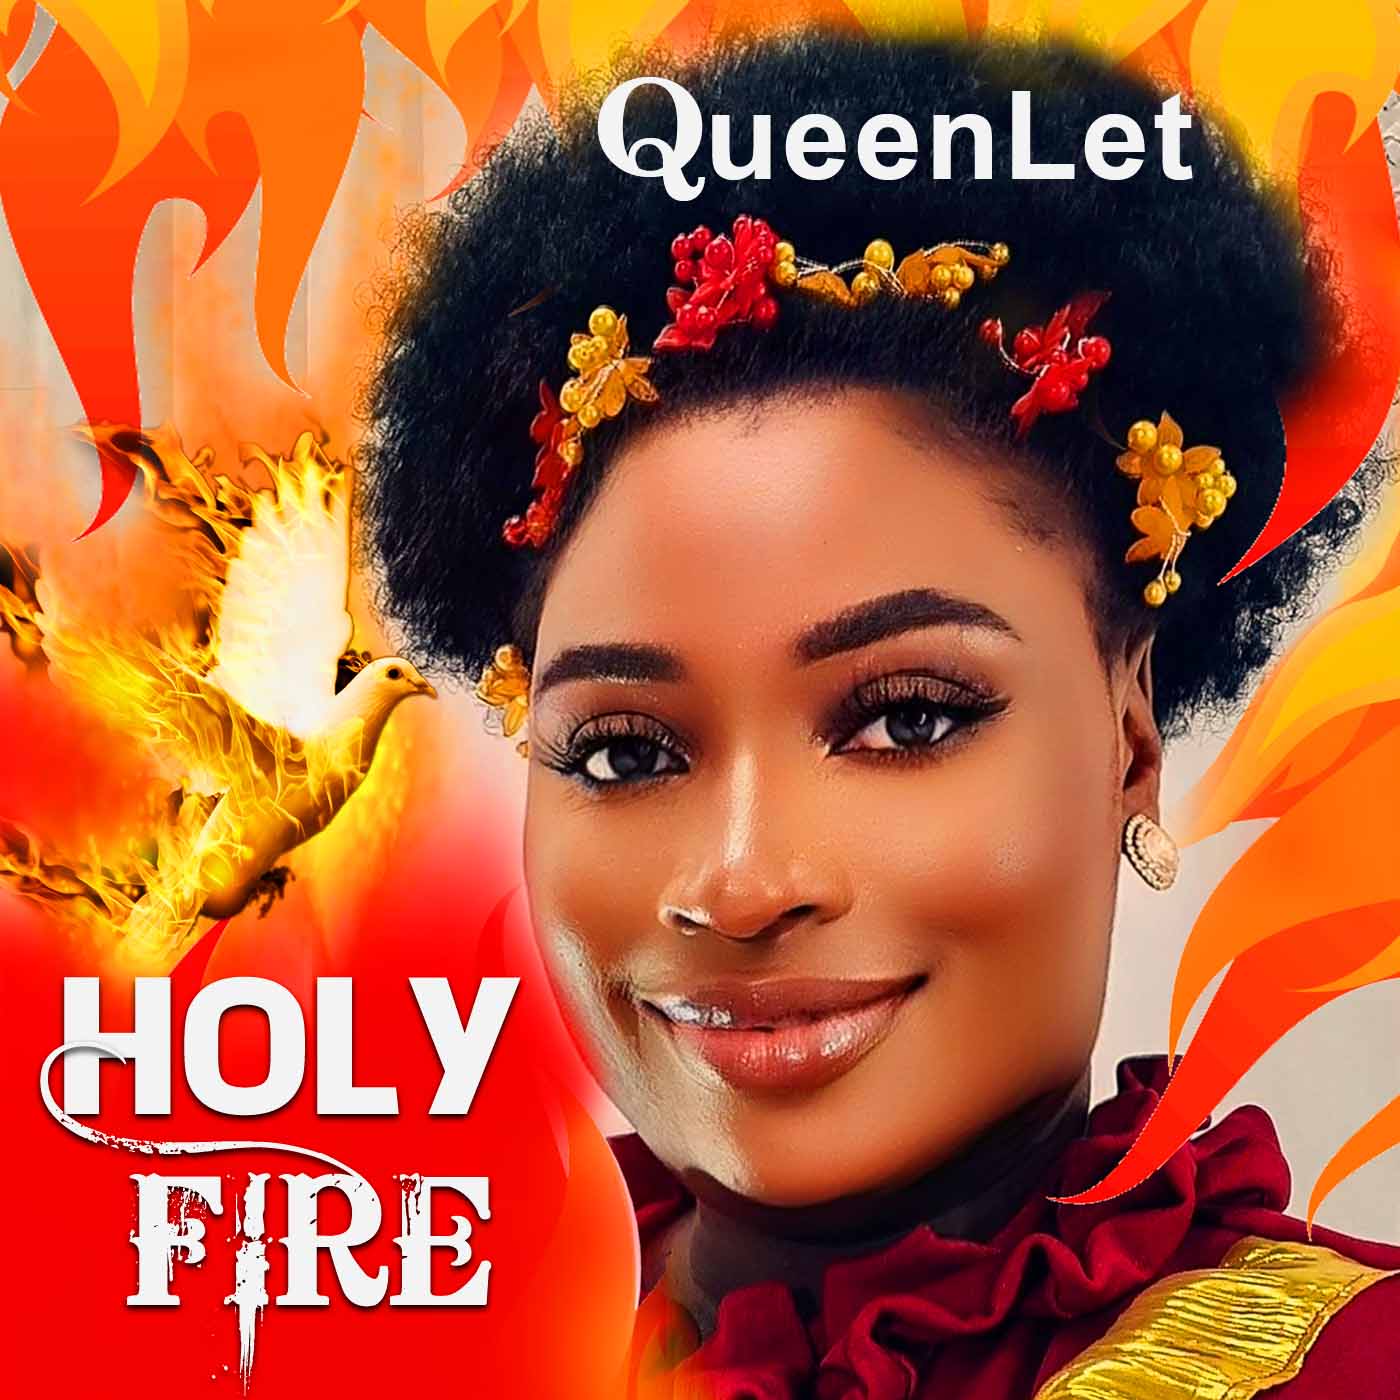 Holy Fire by QueenLet